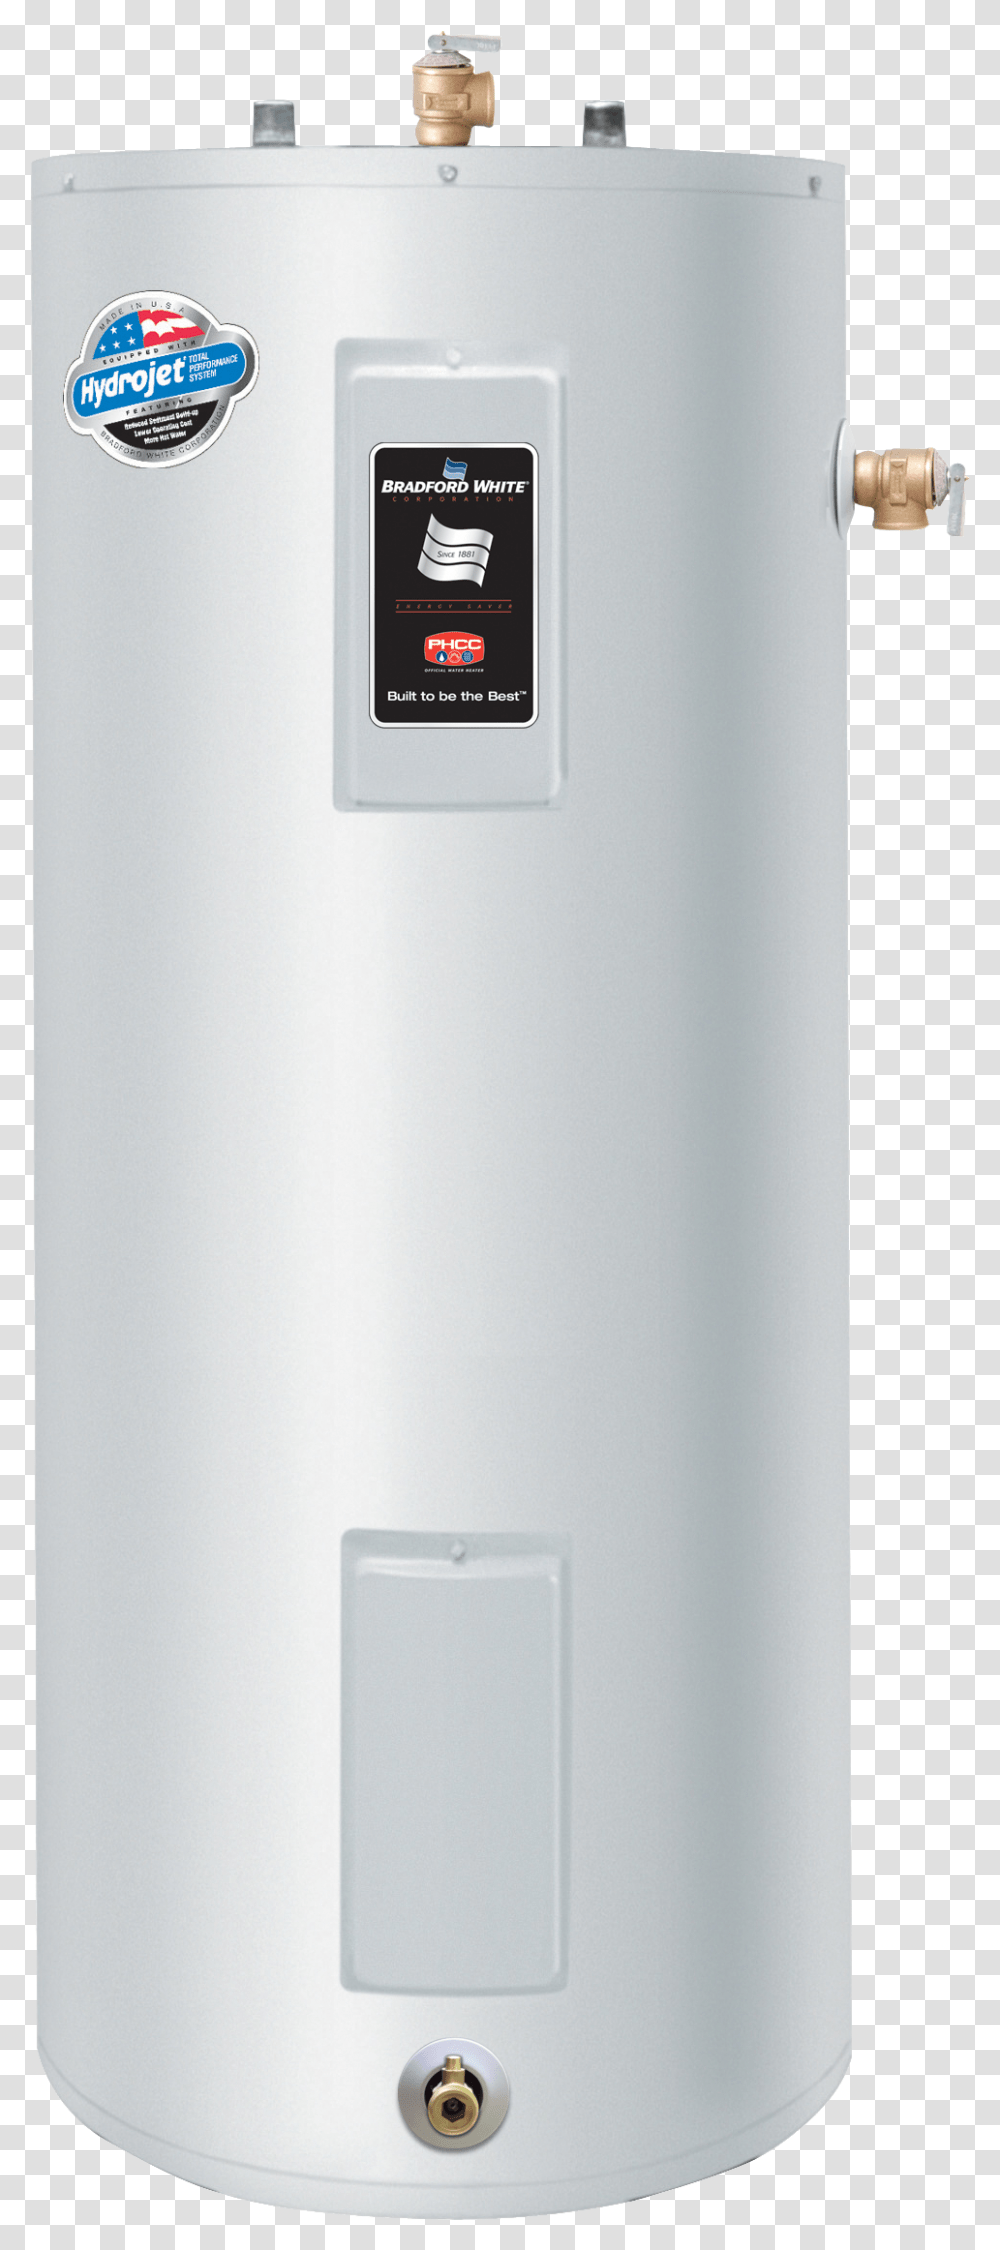 Electric Water Heater Download Bradford Water Heater, Appliance, Refrigerator, Space Heater Transparent Png